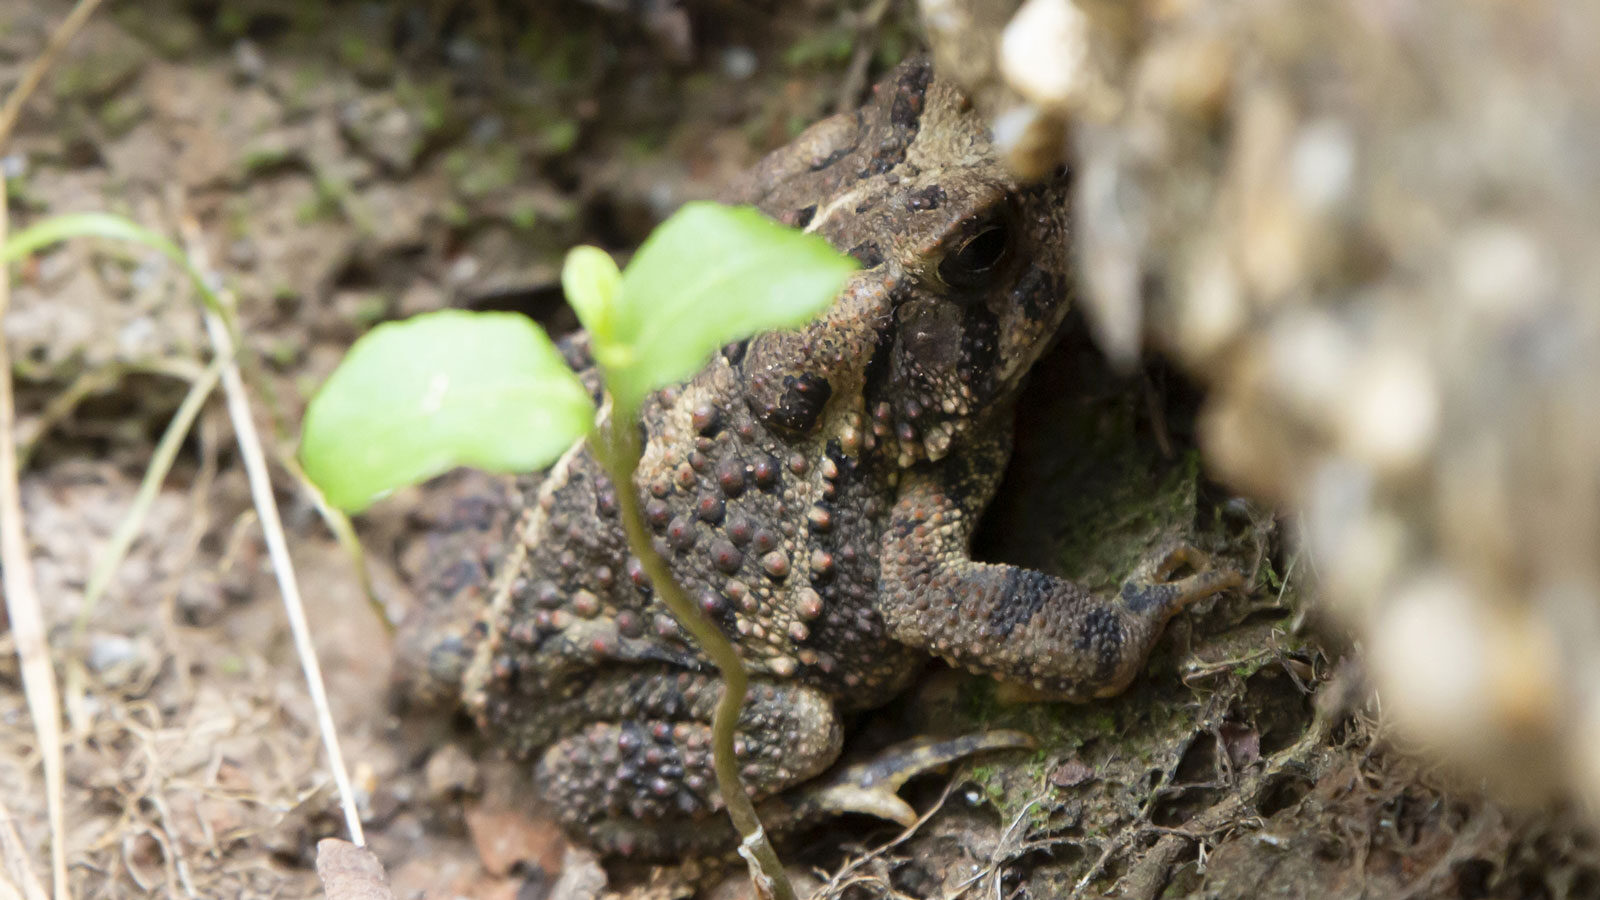 American toad in mud near cement